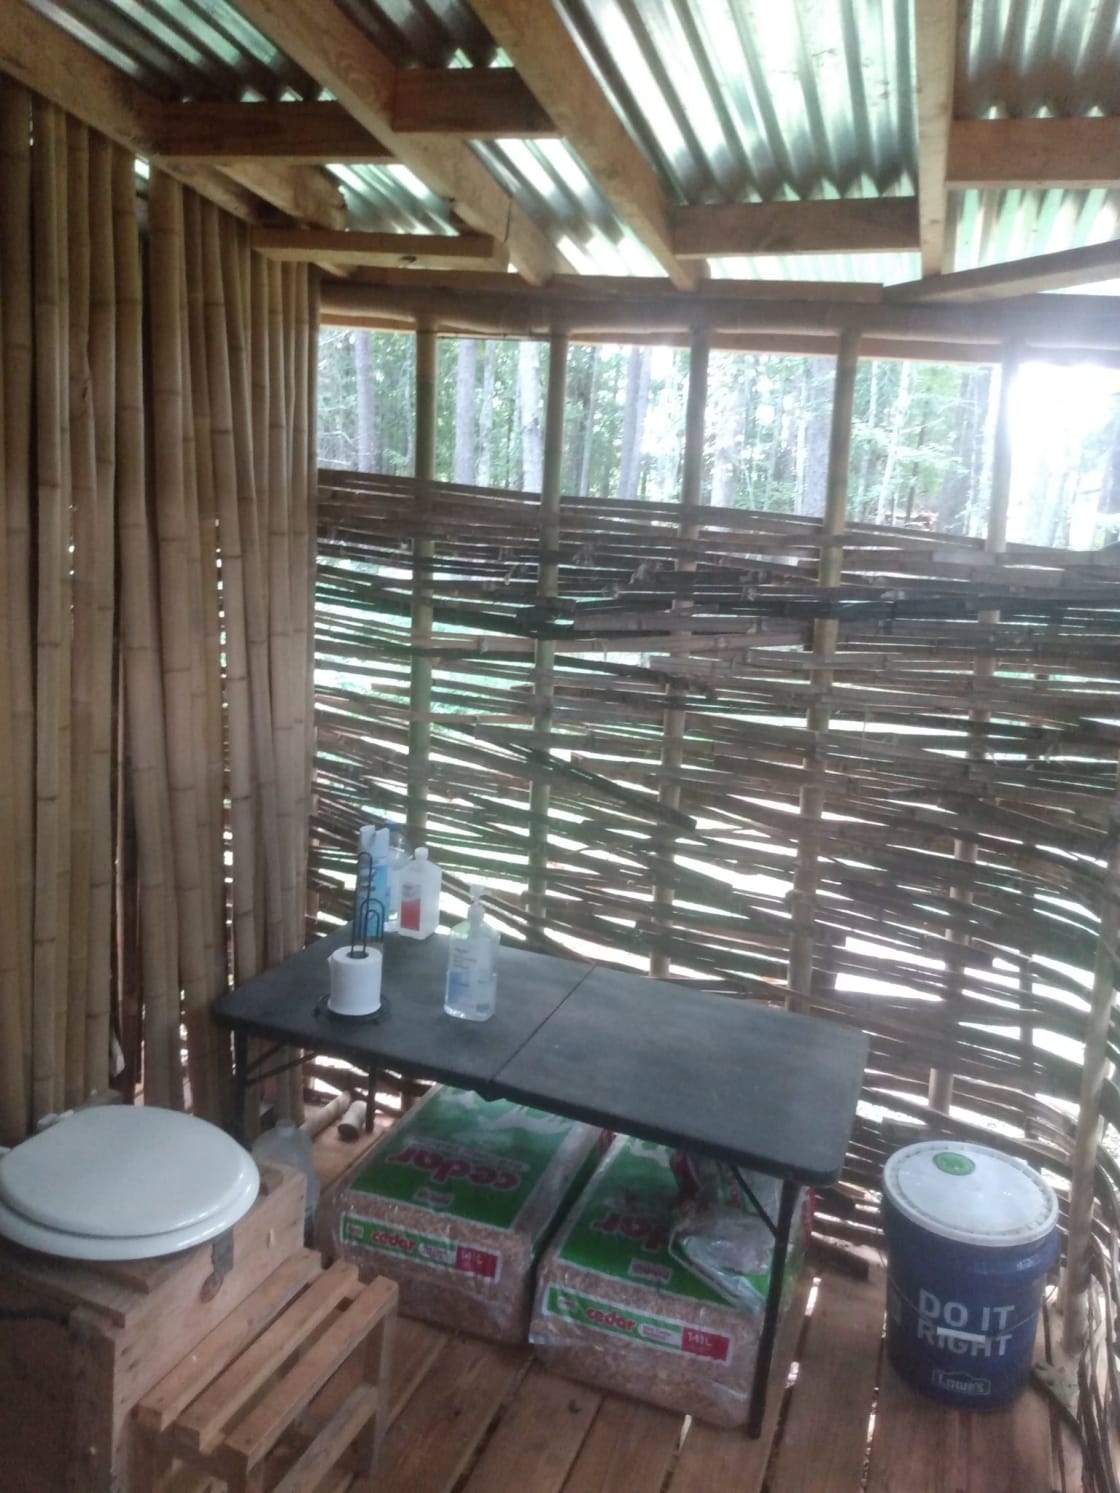 Bamboo Restroom with compost toilet.